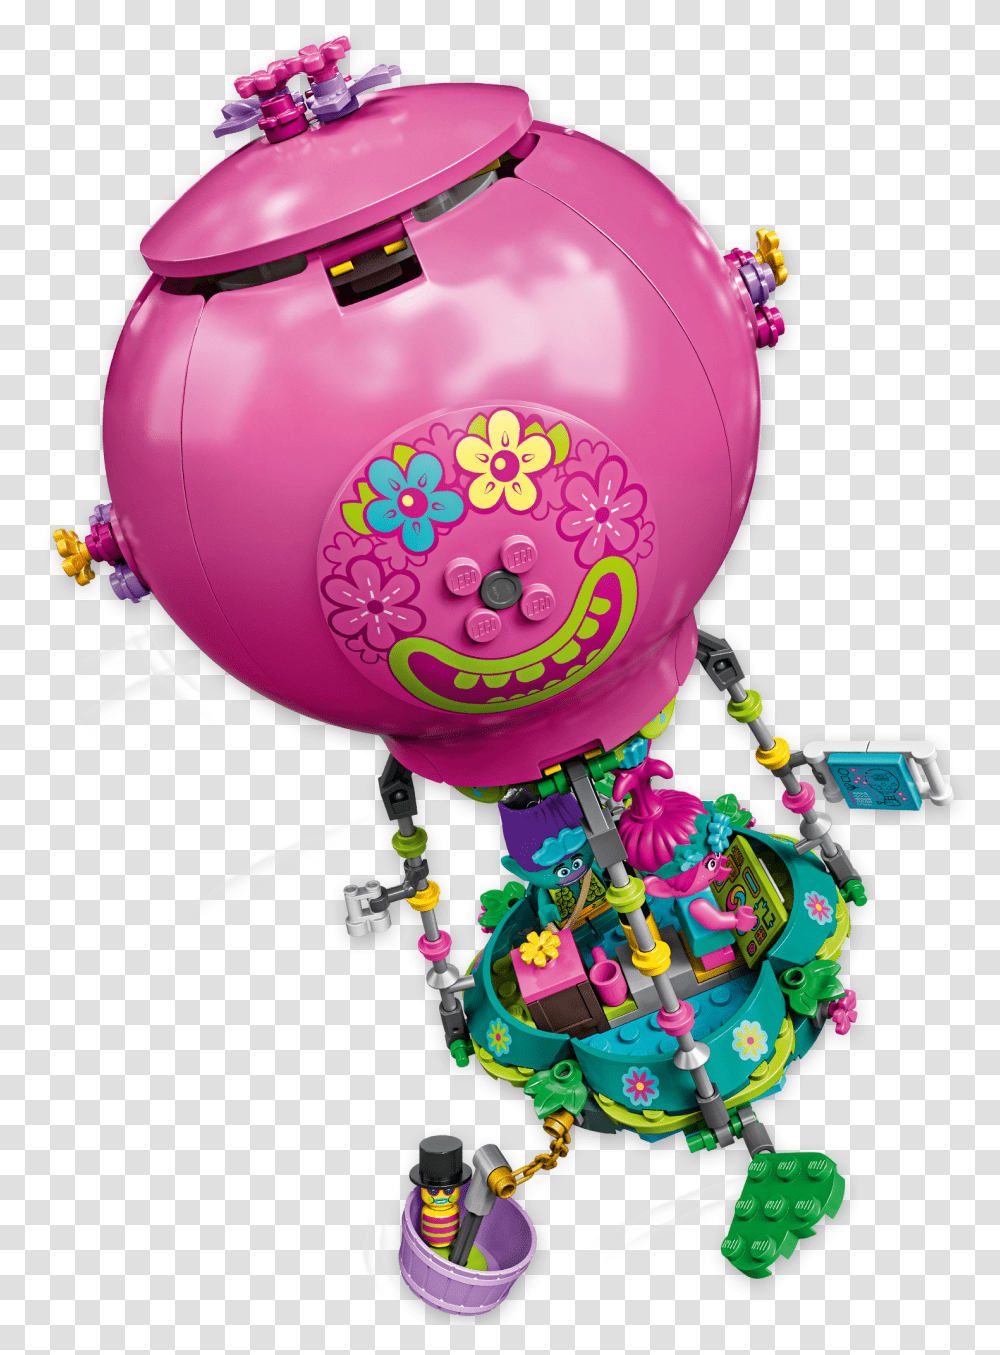 Lego Trolls Poppyquots Hot Air Balloon Adventure, Toy, Paper Transparent Png